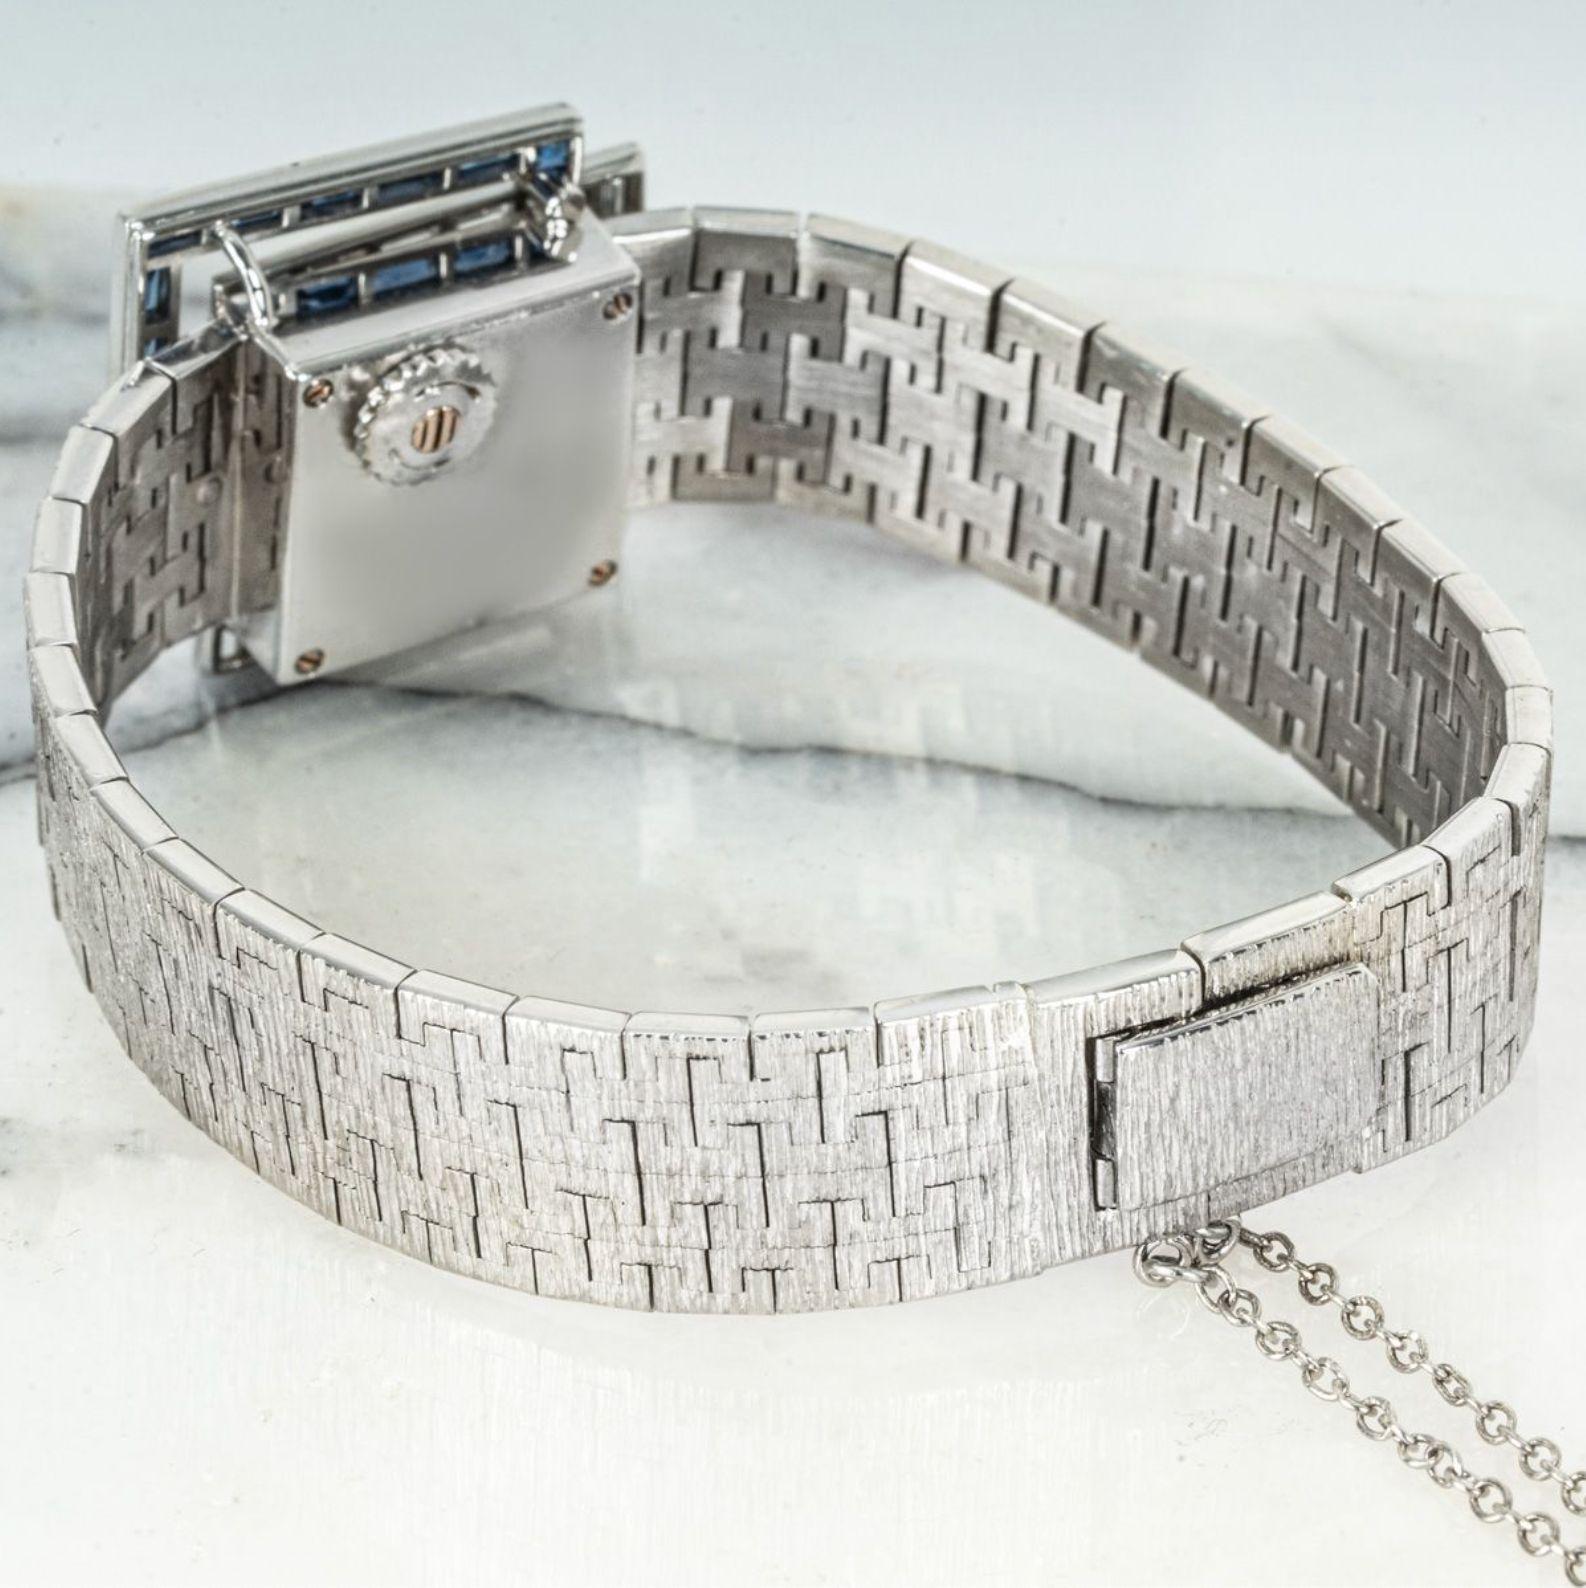 Piaget Cocktail Watch Diamond & Sapphire Set 2504 Watch In Excellent Condition For Sale In London, GB